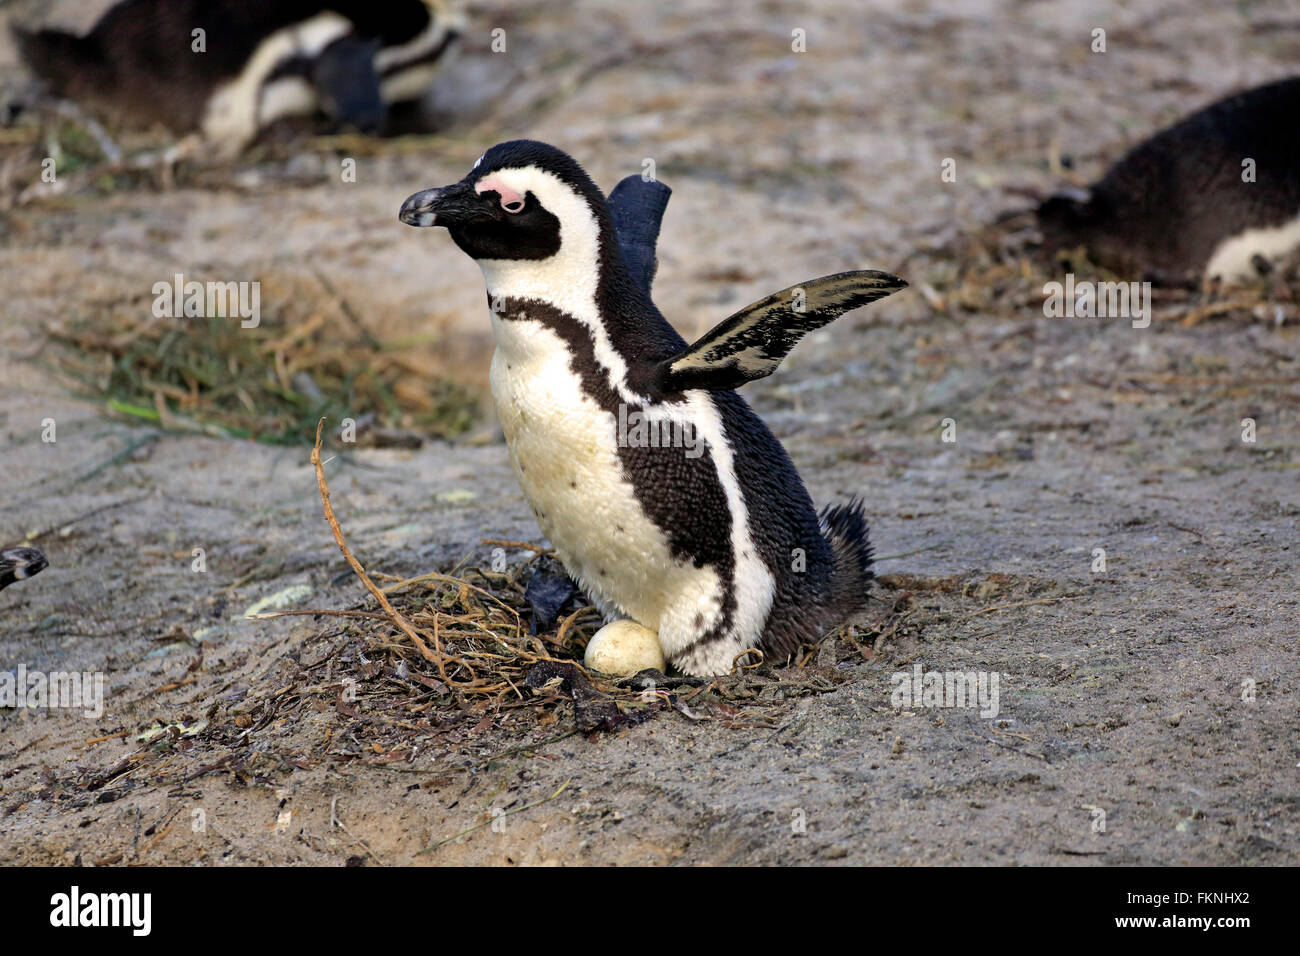 Jackass Penguin African penguin adult with egg at nest spread wings Boulders Beach Simonstown Western Cape South Africa Africa Stock Photo